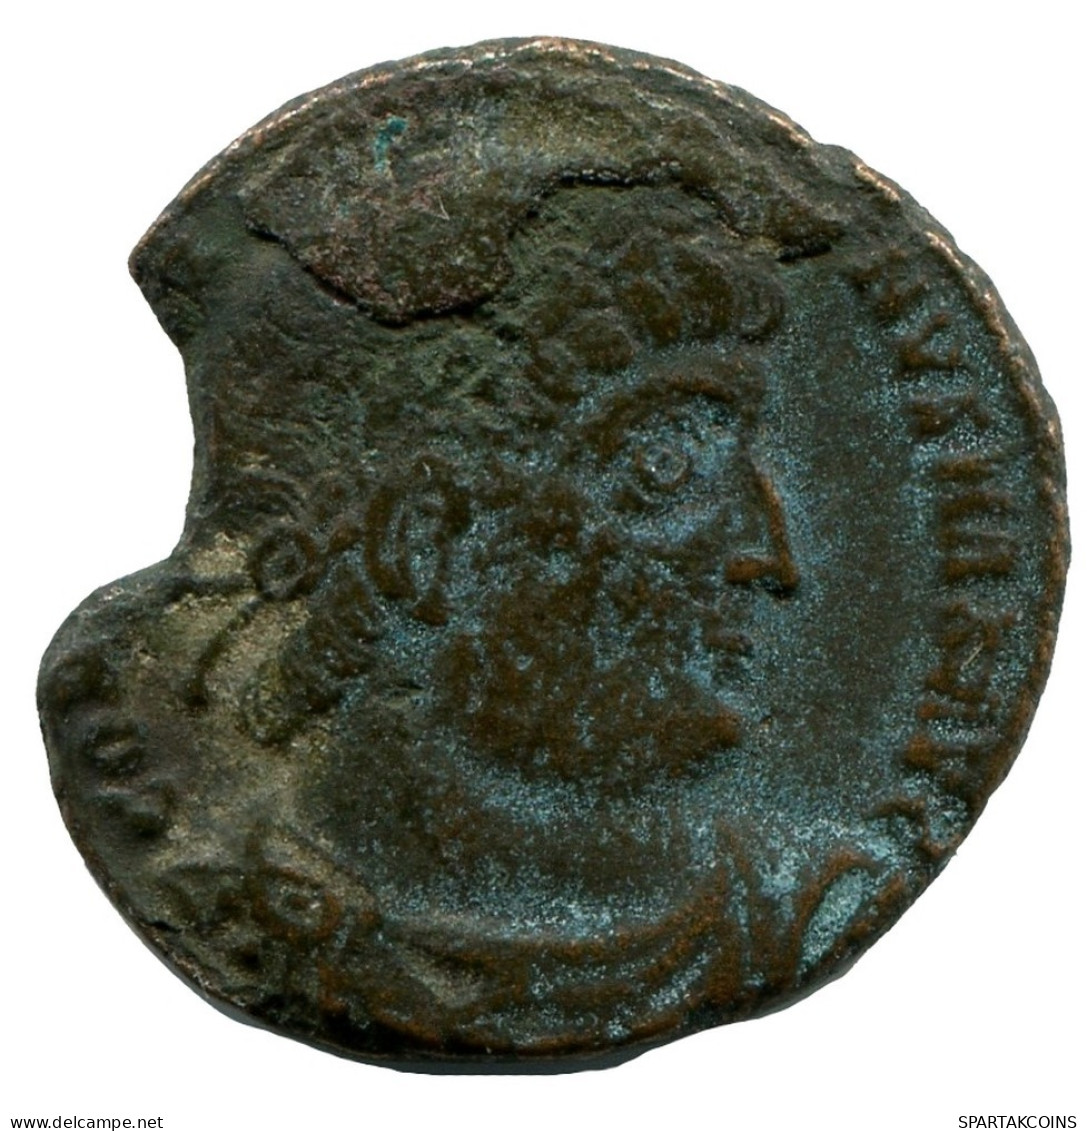 CONSTANTINE I MINTED IN ANTIOCH FOUND IN IHNASYAH HOARD EGYPT #ANC10712.14.D.A - The Christian Empire (307 AD To 363 AD)